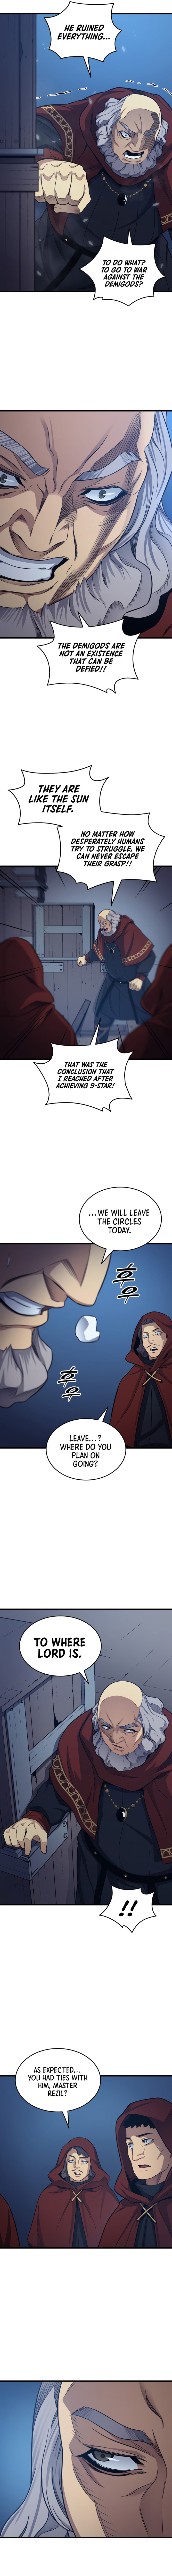 The Great Mage Returns After 4000 Years - Chapter 137 Page 3